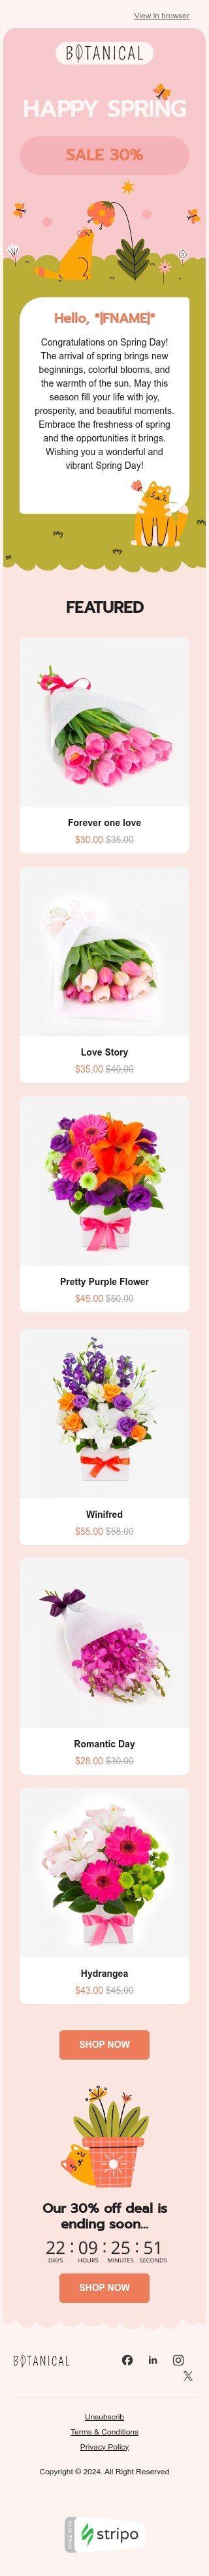 Spring email template "Spring flowers" for gifts & flowers industry mobile view